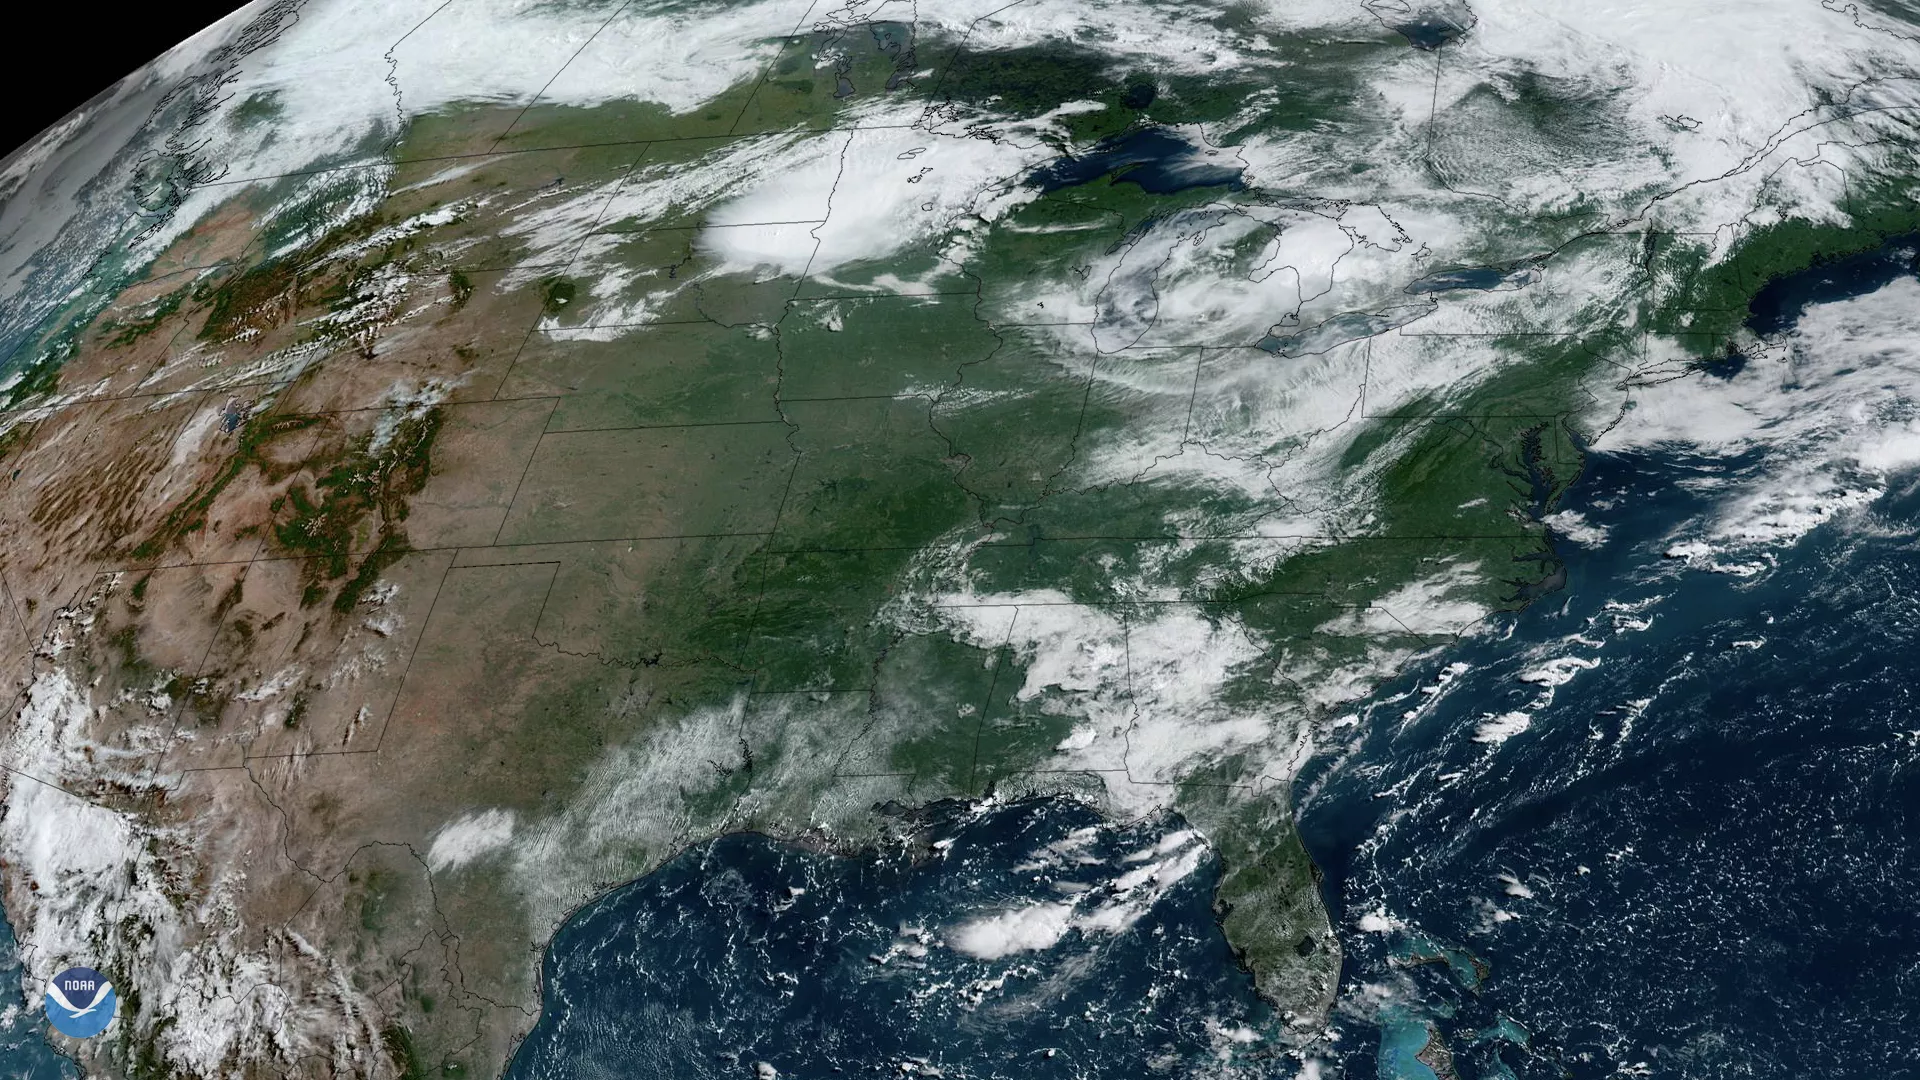 GOES East GeoColor satellite imagery of storms over the Upper Midwest on Friday, July 19, 2019 Areas shown include South Dakota,  Minnesota, and Wisconsin.